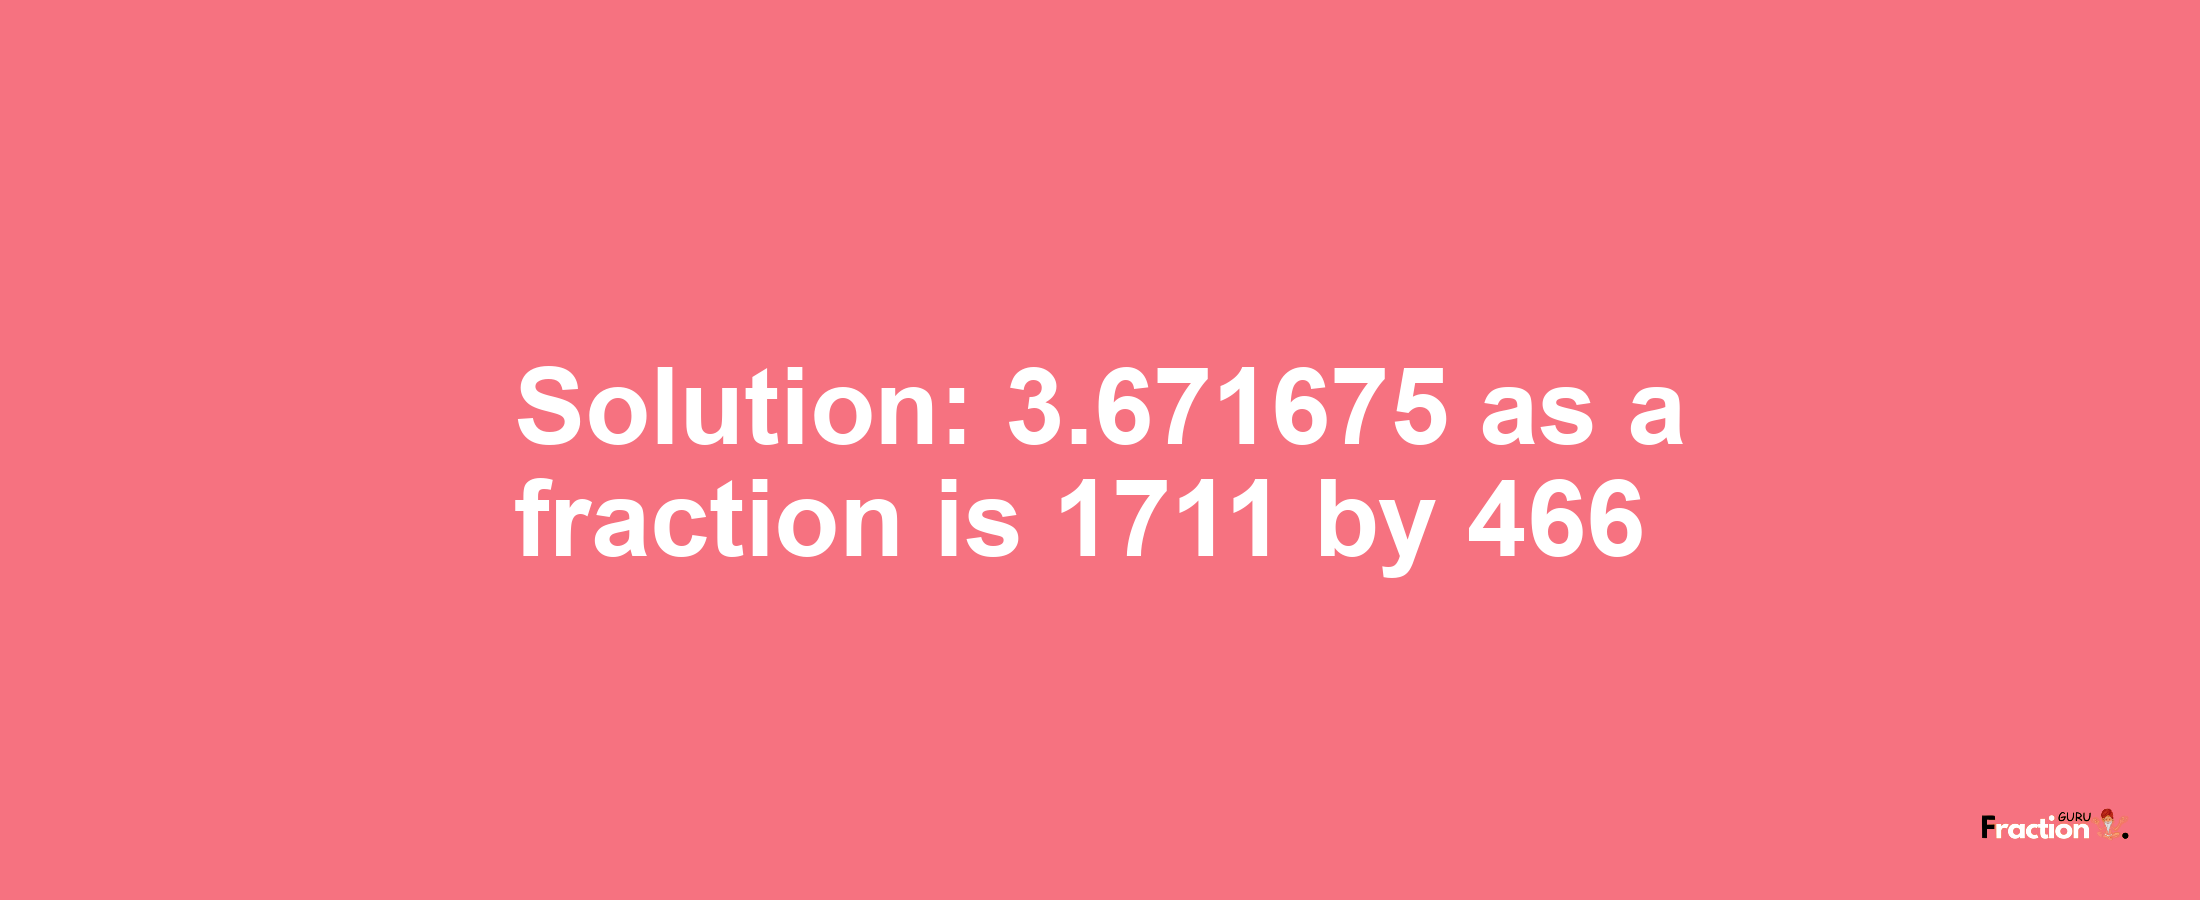 Solution:3.671675 as a fraction is 1711/466